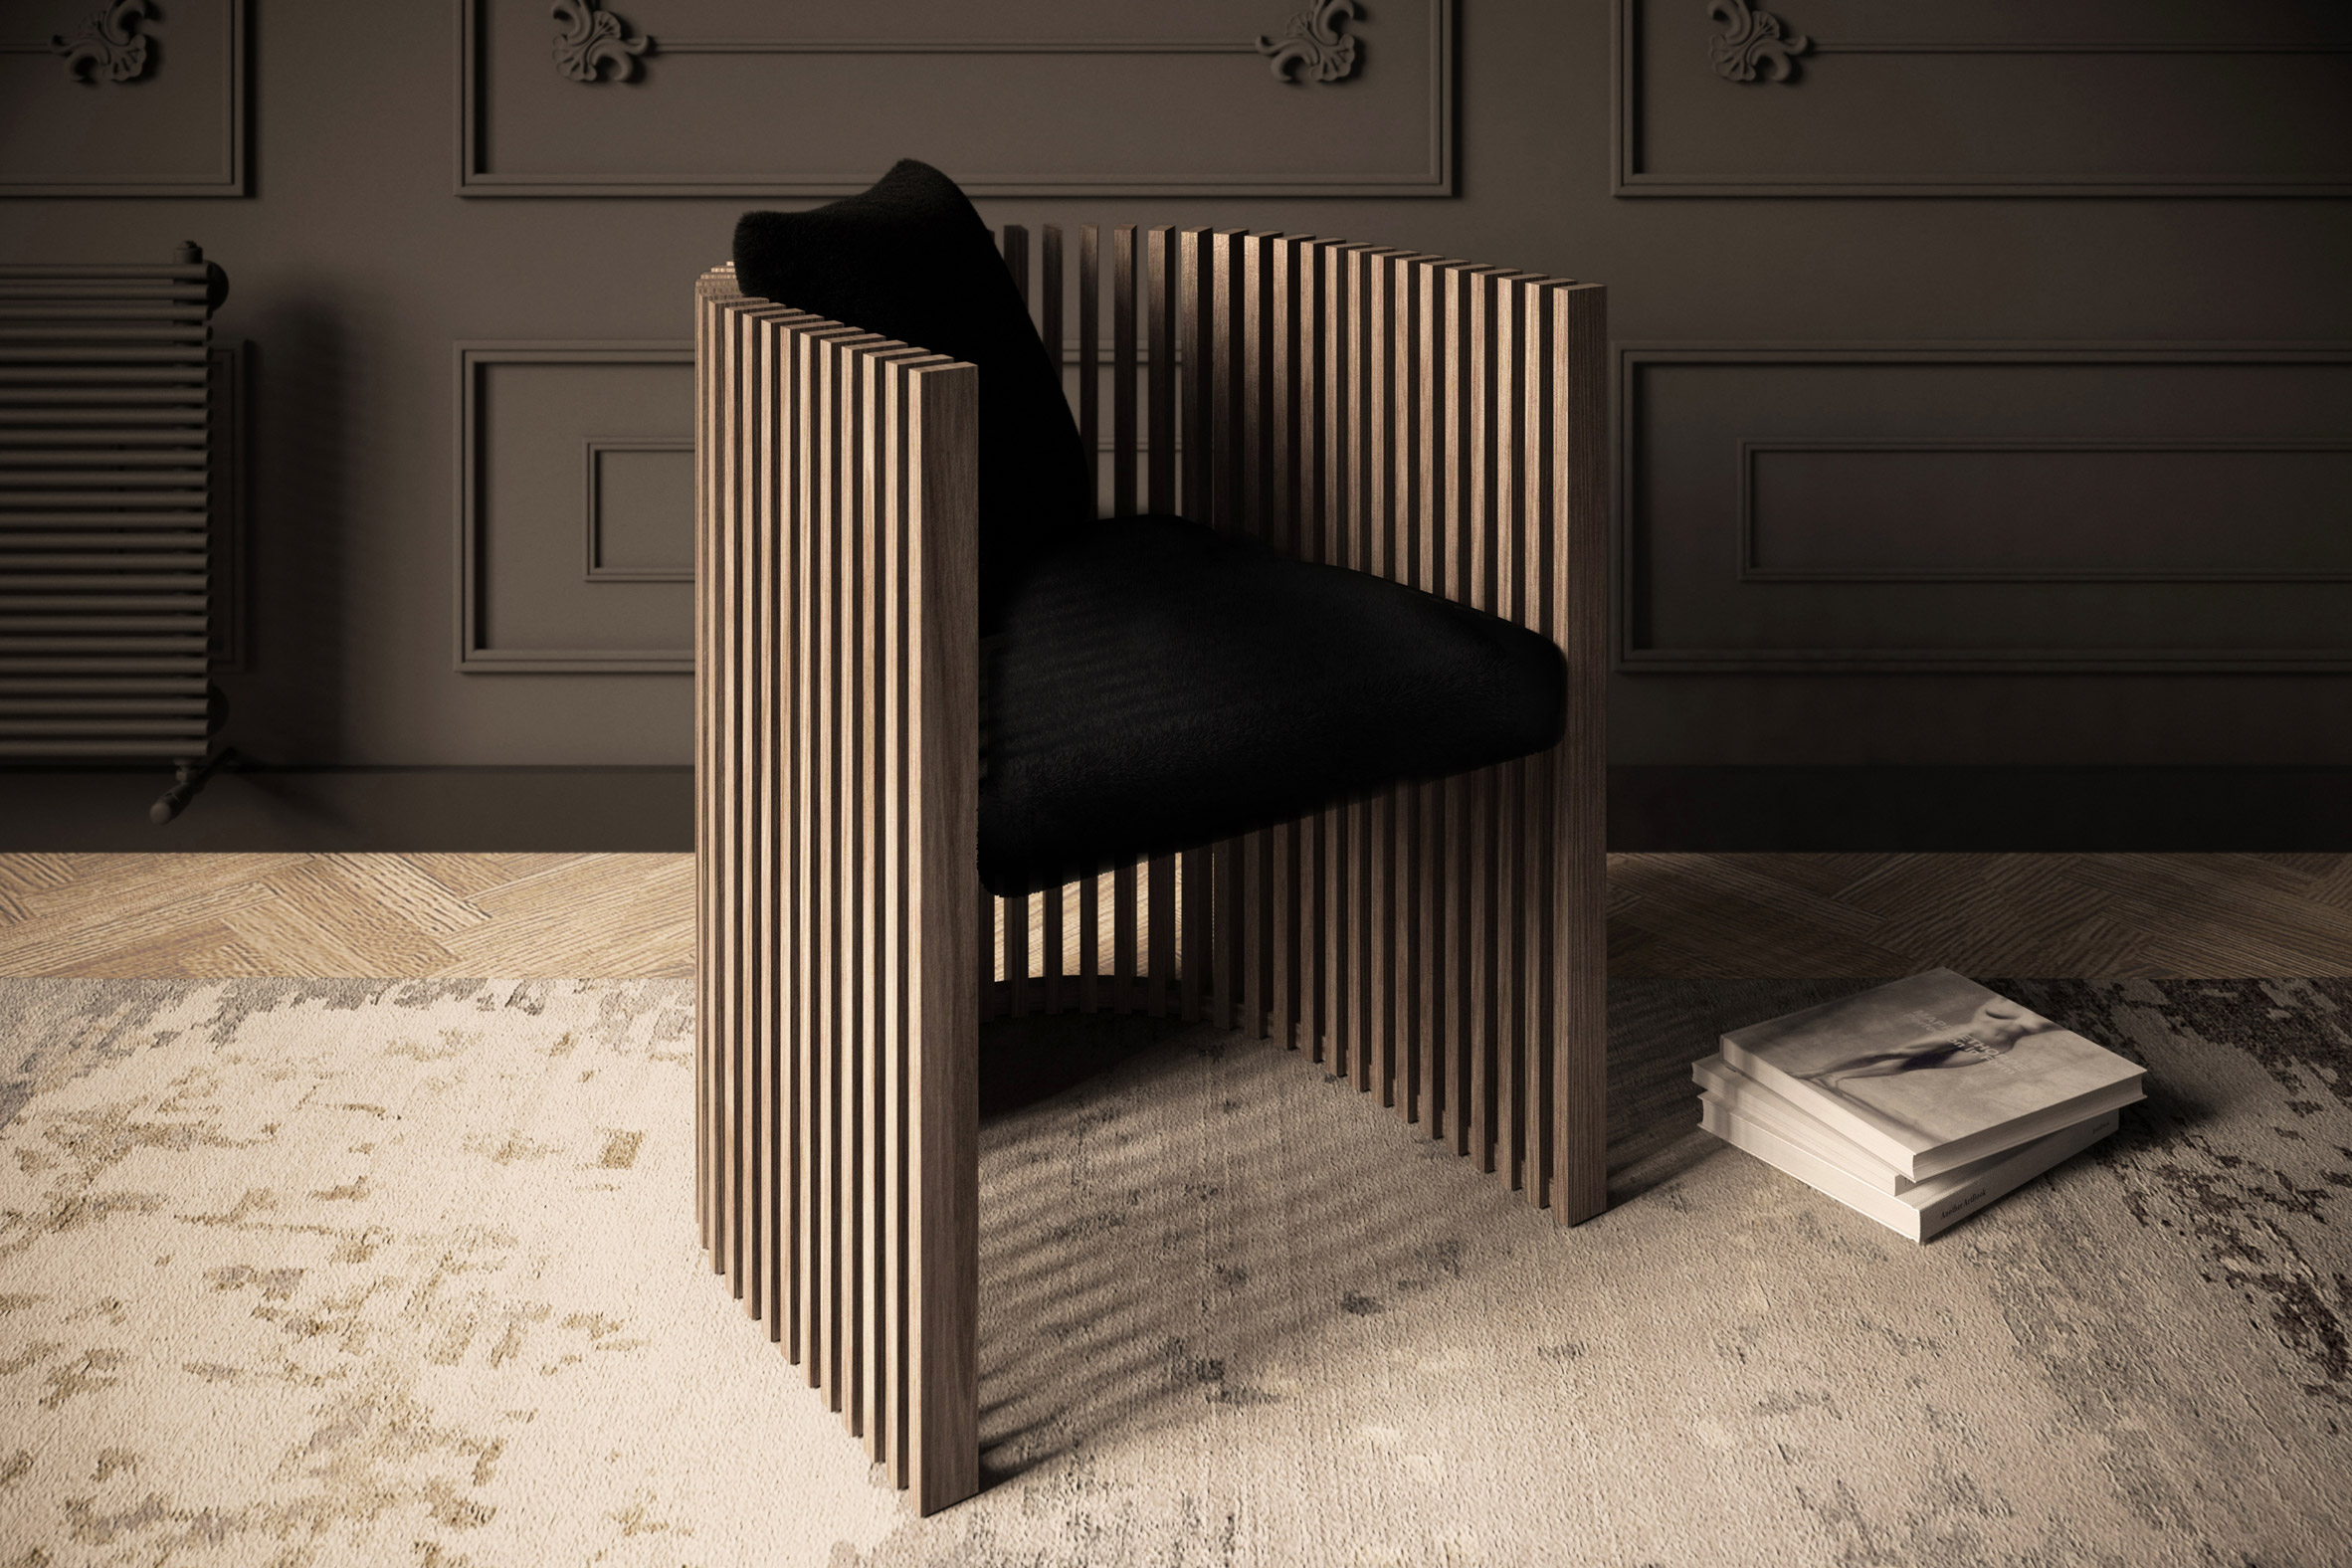 Nabil Issa debuts "minimalistic yet bold" furniture collection